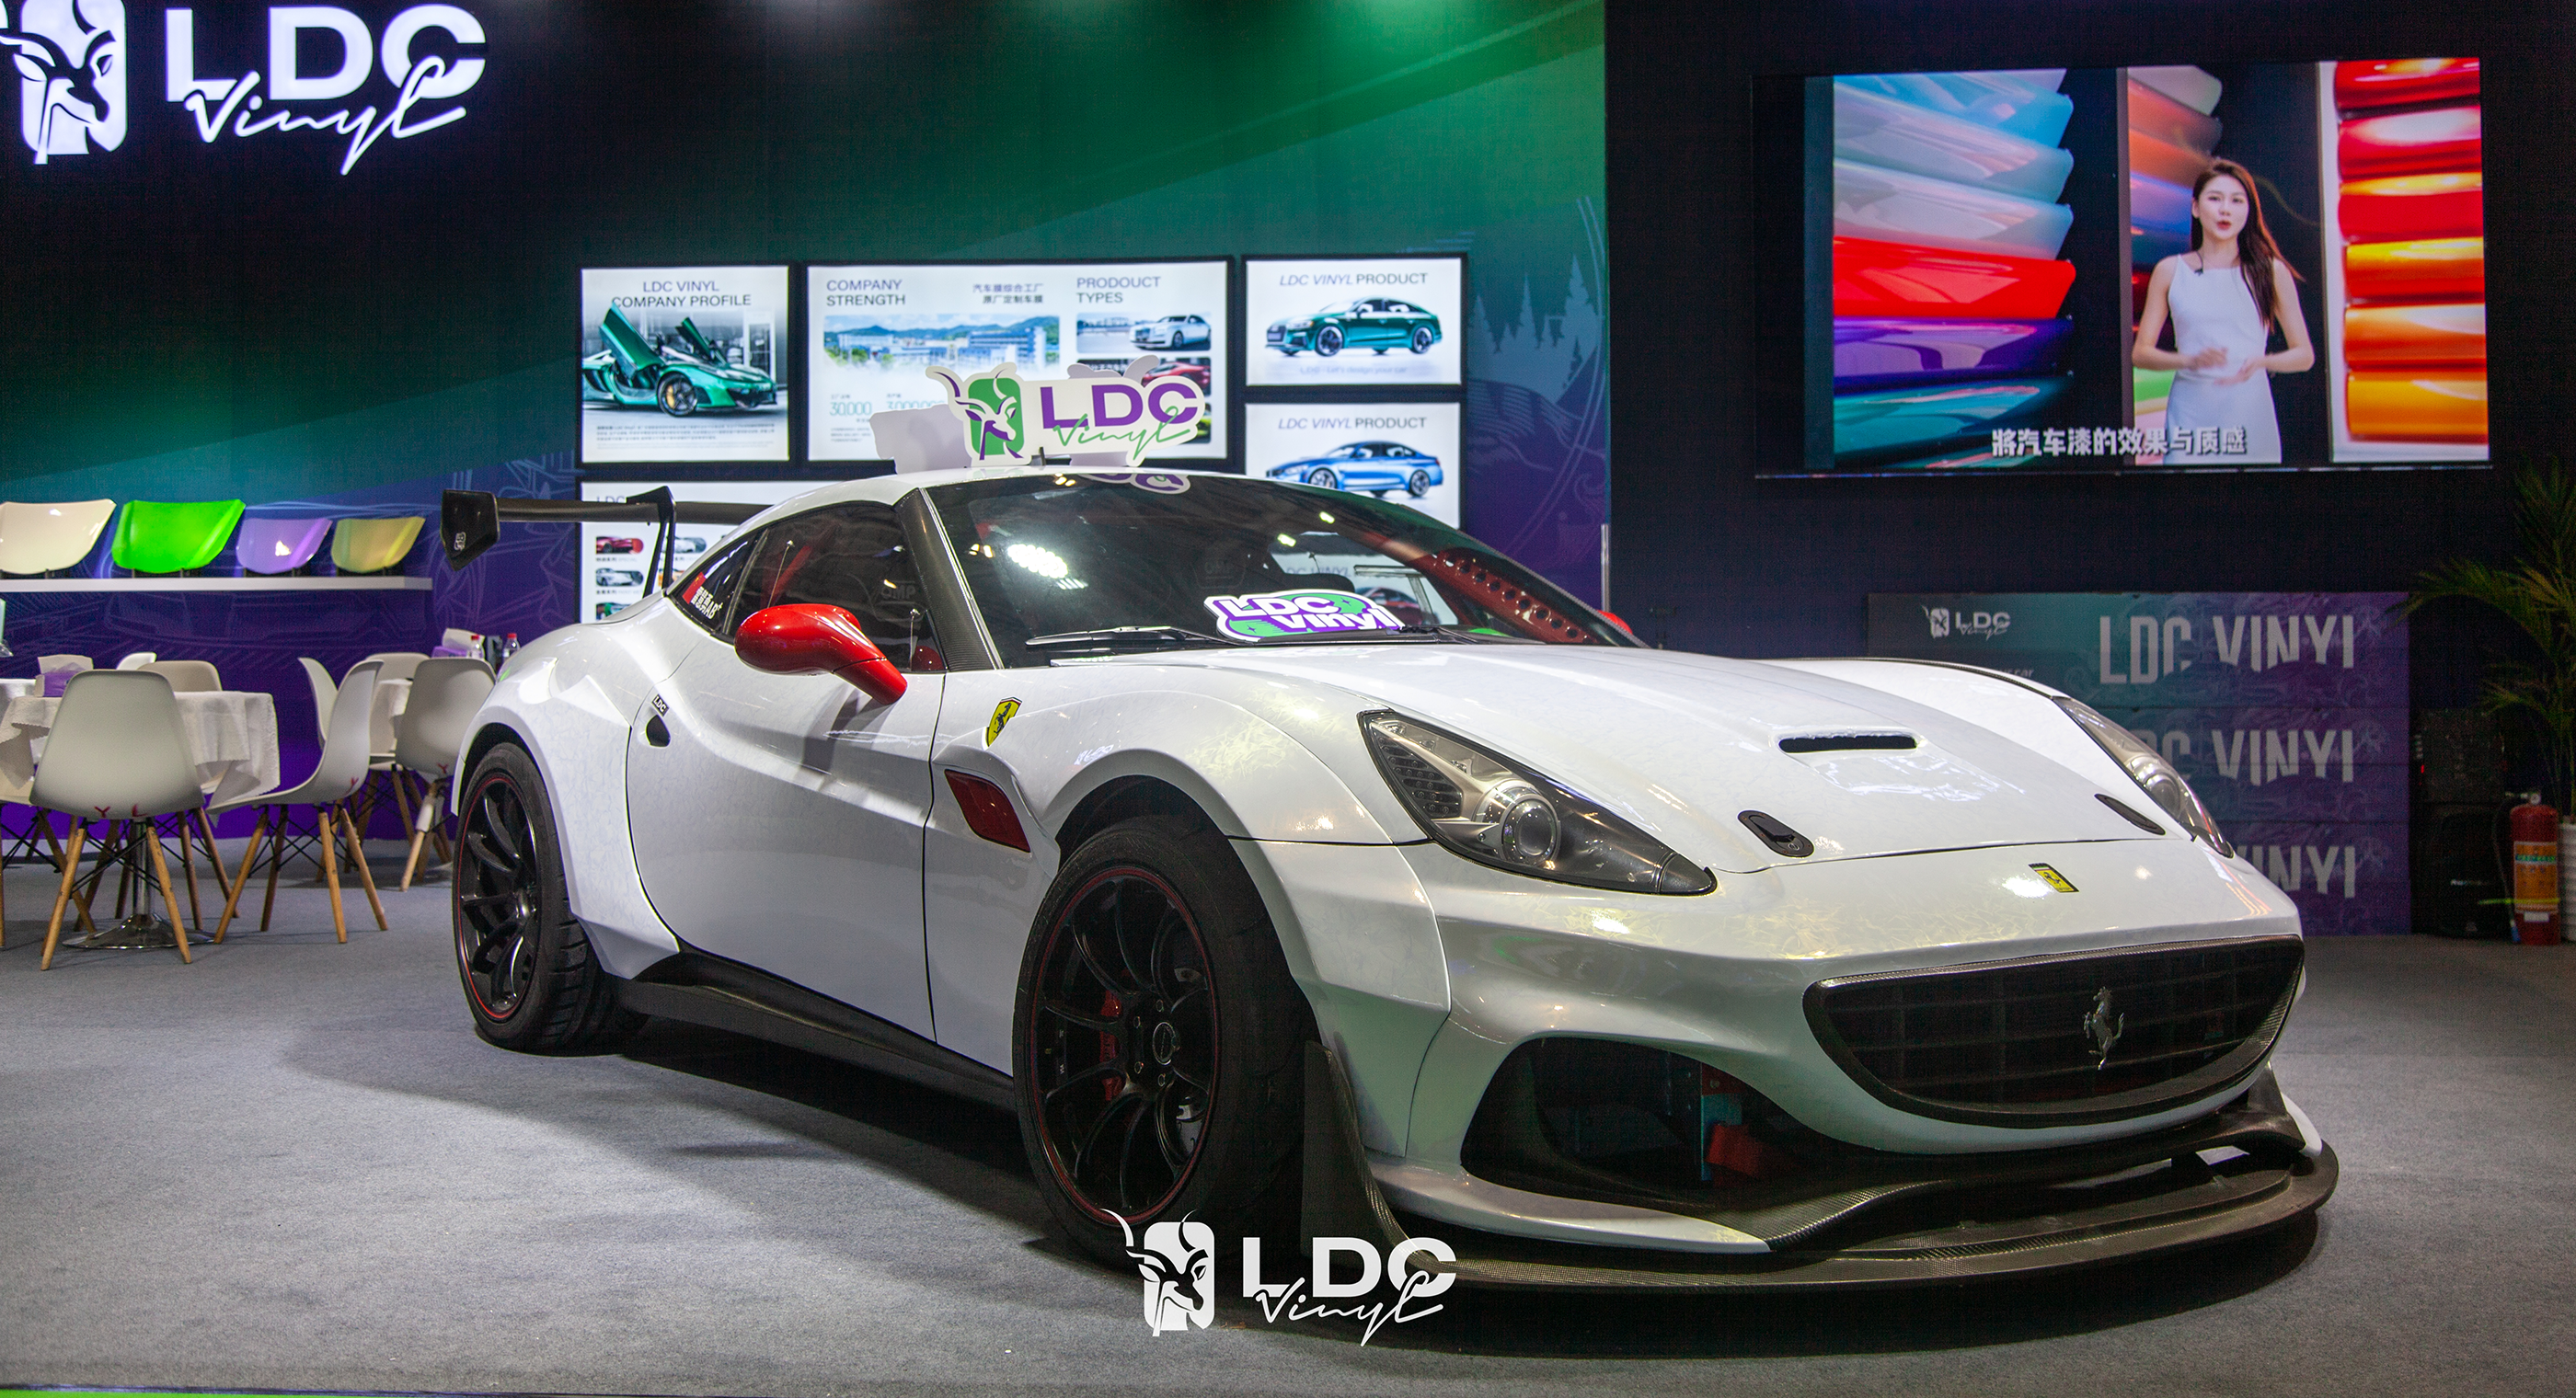 The LDC Display Car of AutoEcoSystems Shenzhen